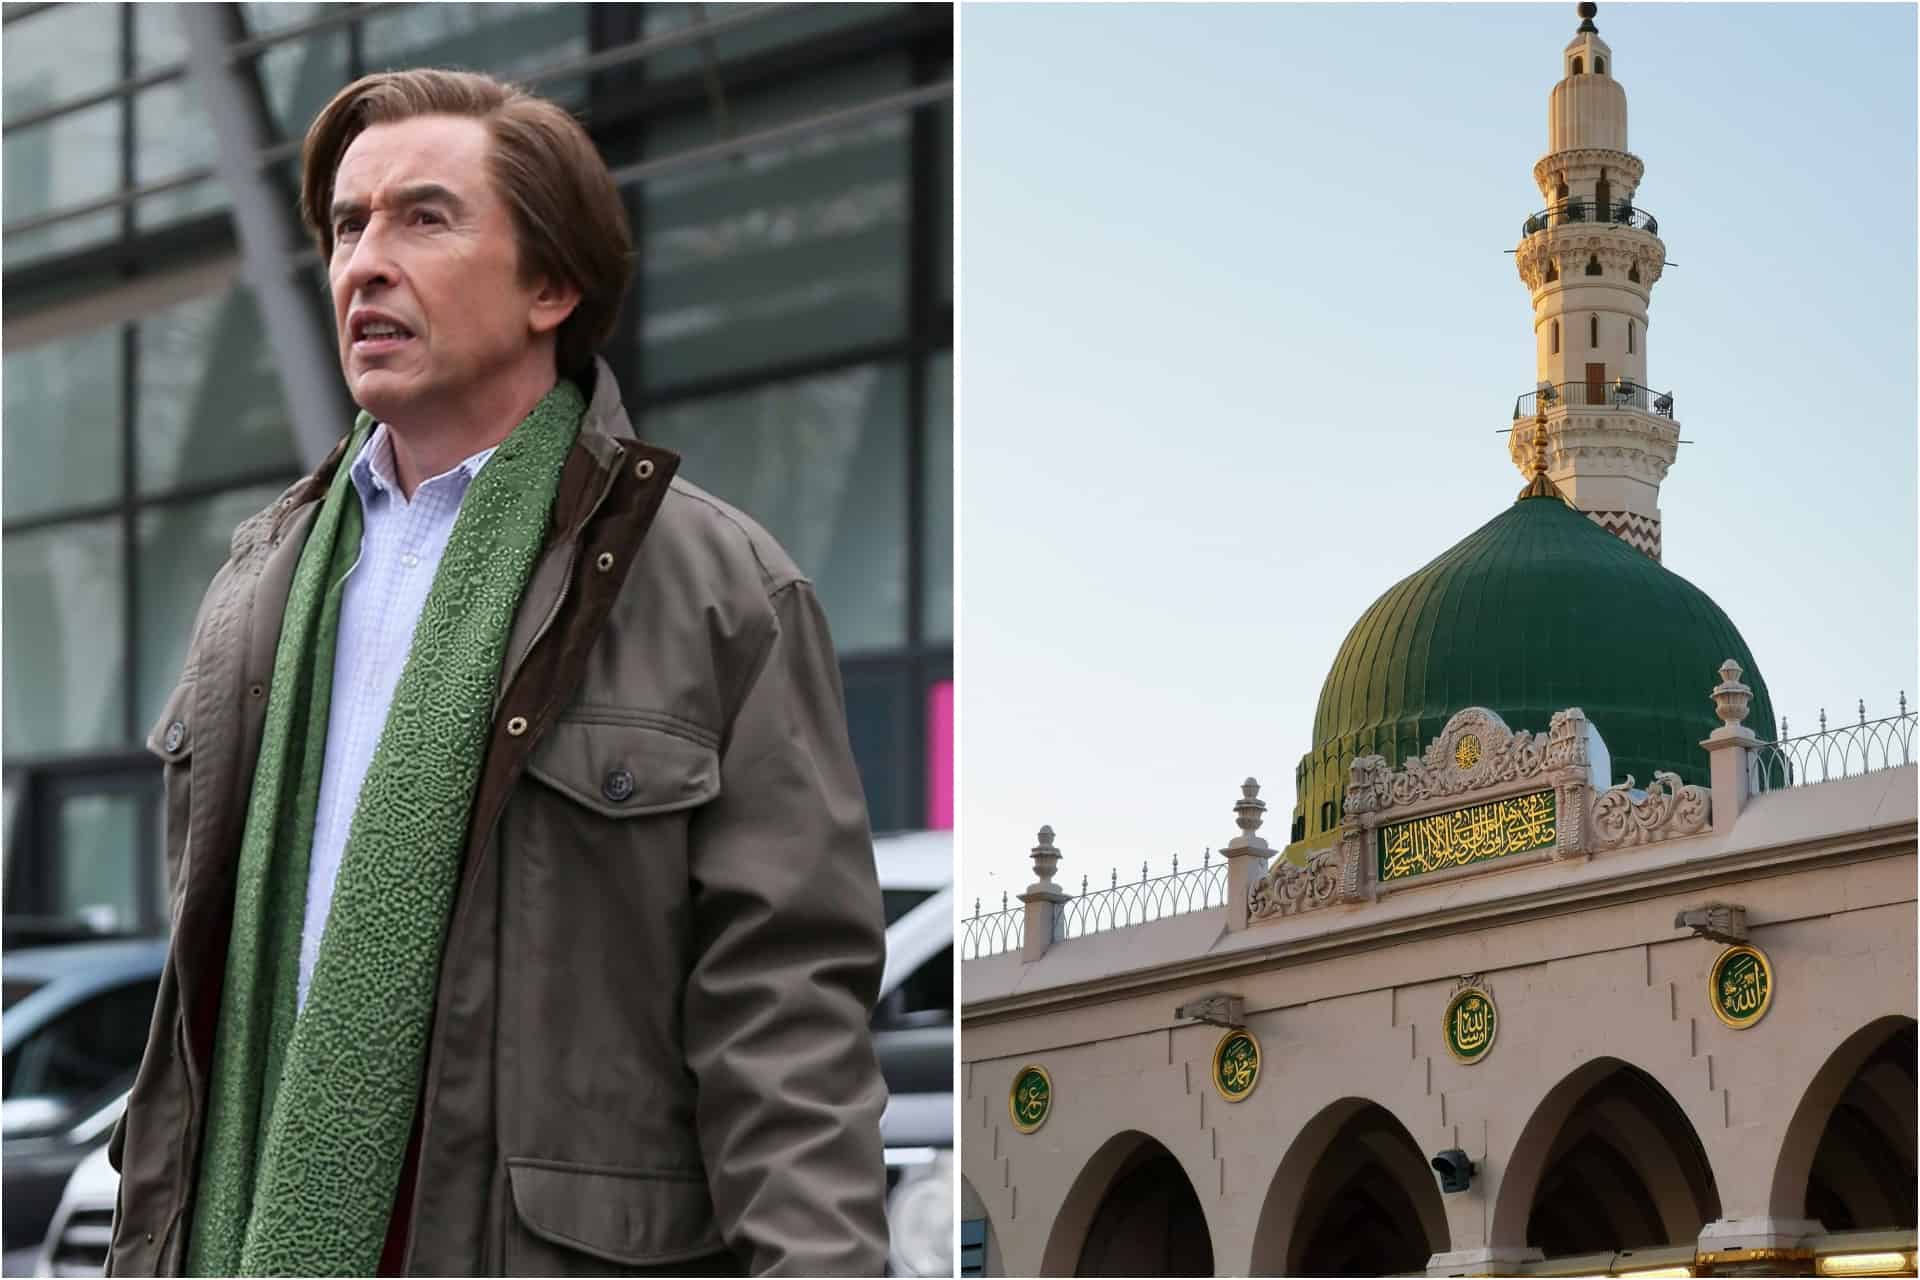 Alan Partridge to return in new BBC comedy series